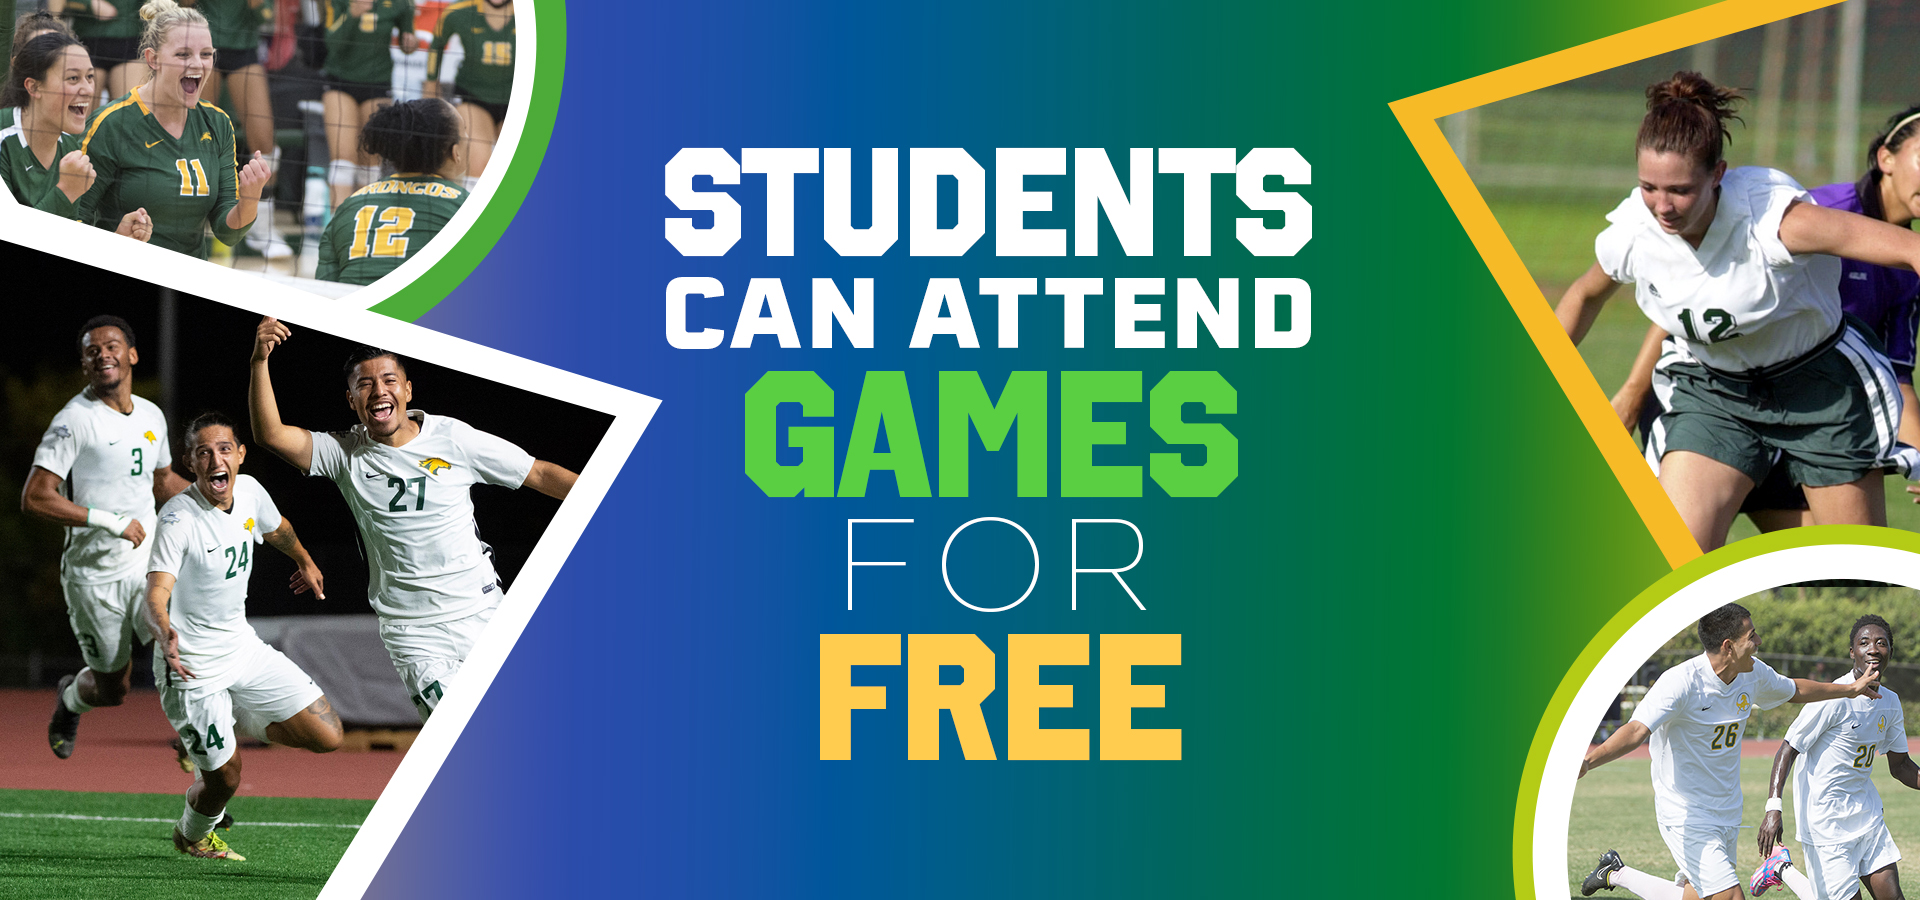 Students can attend sports games for free